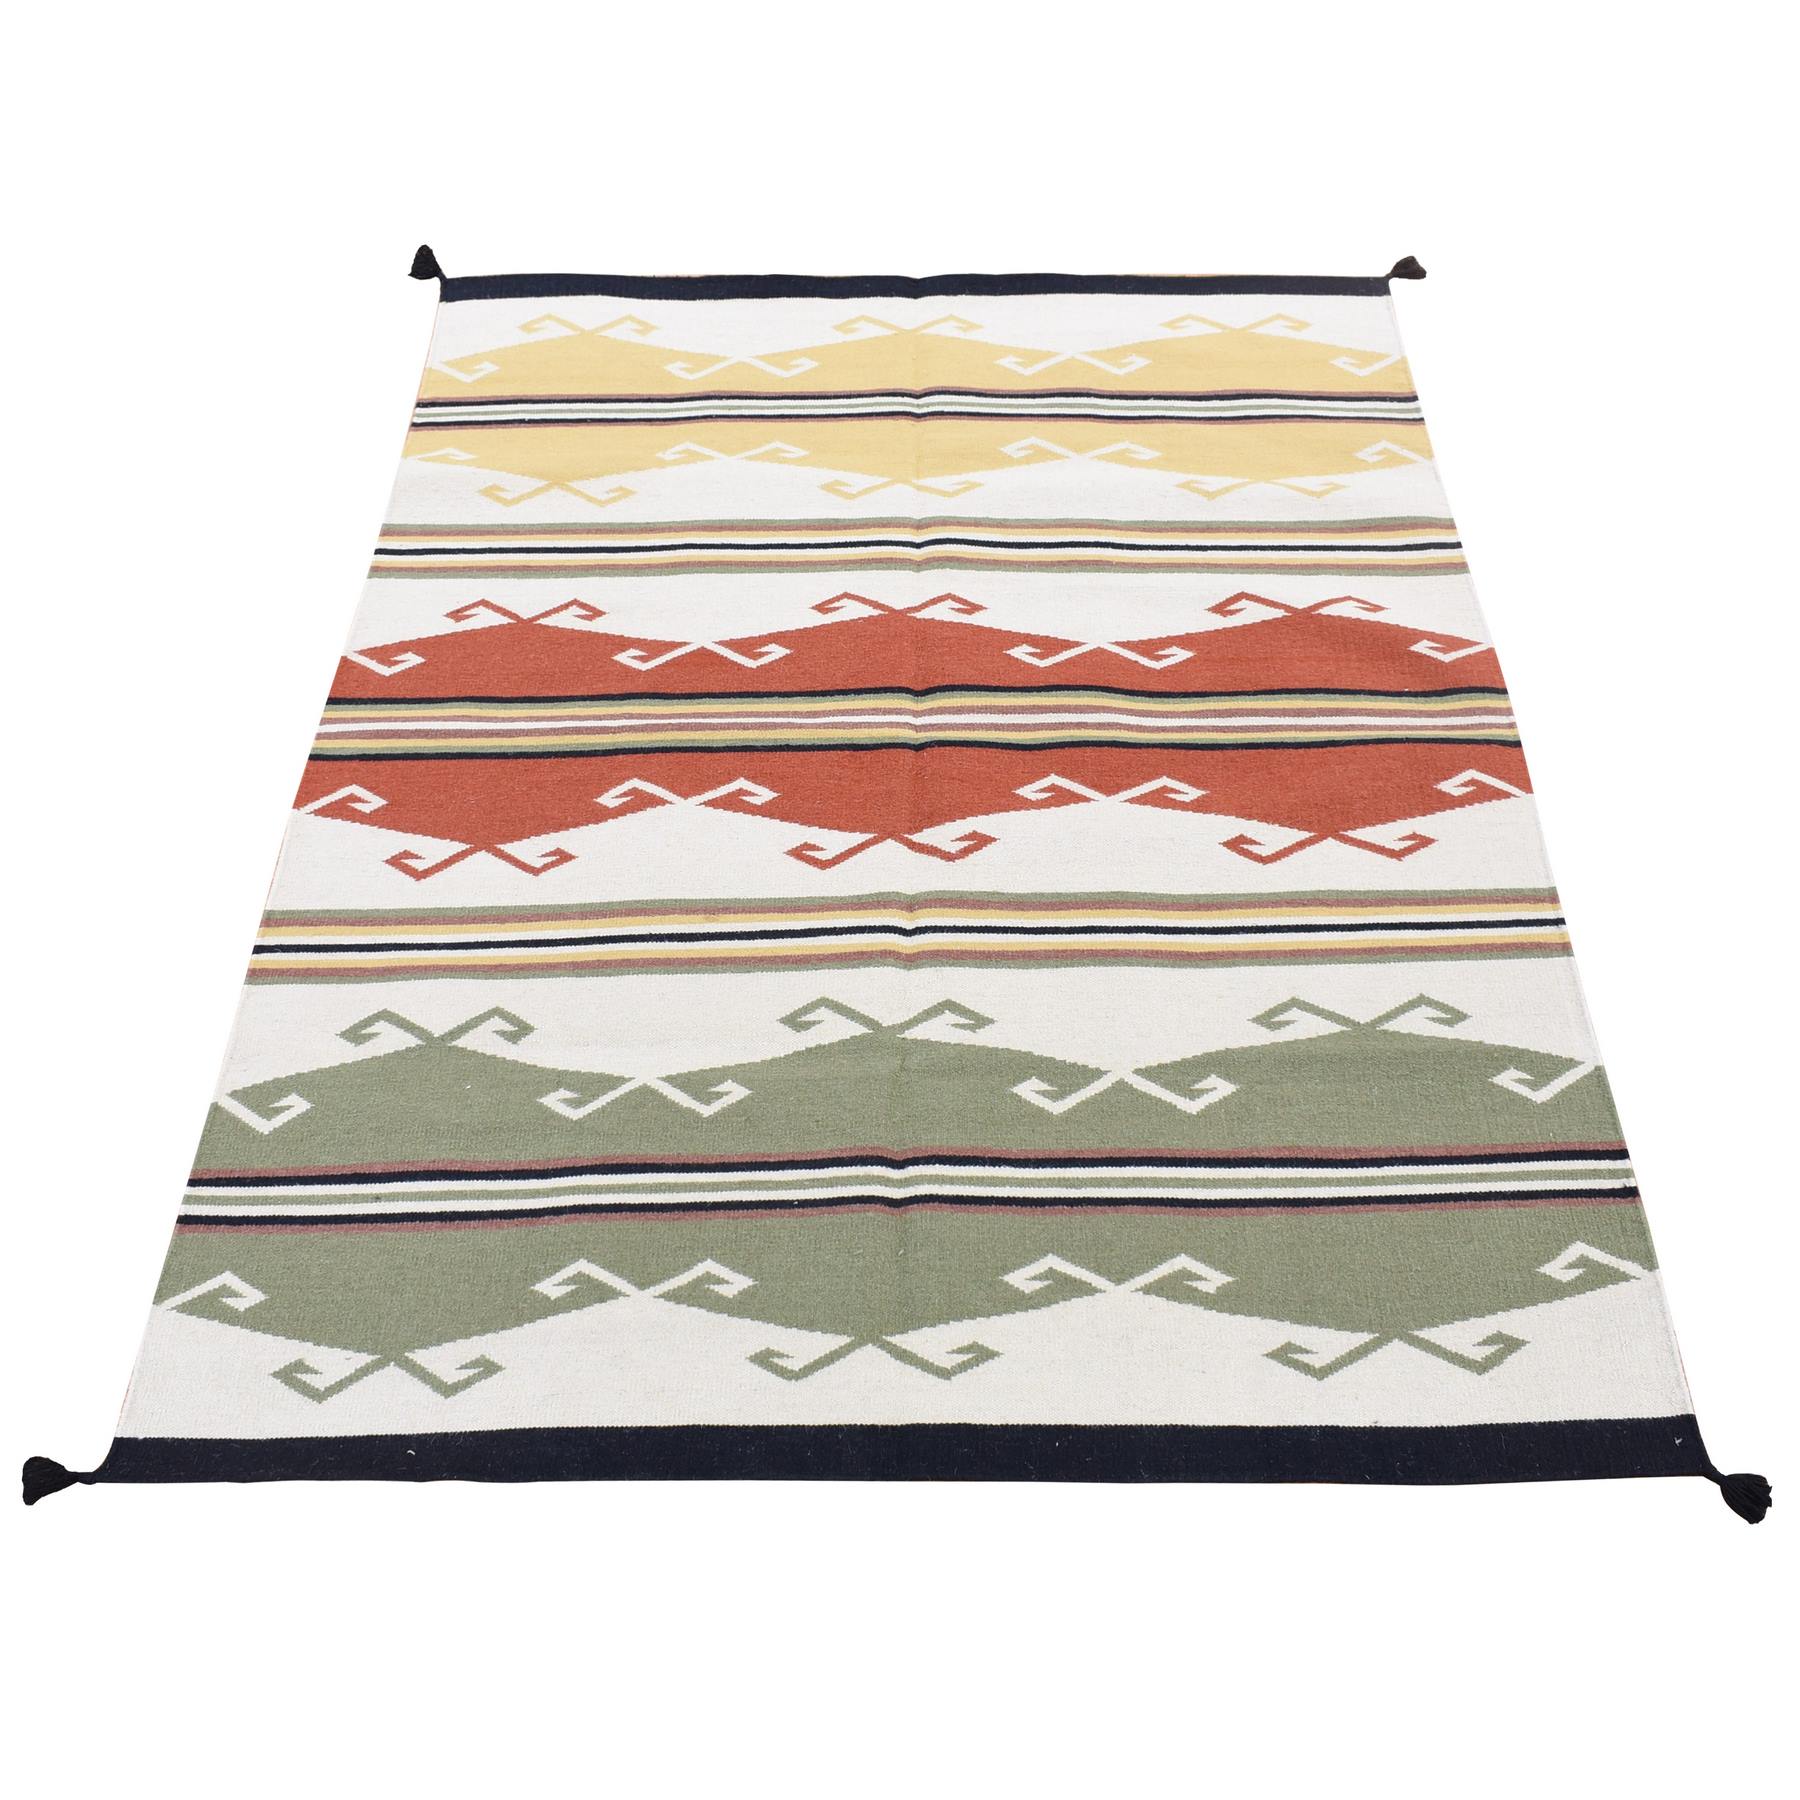 Ivory, Navajo Design, Flat Weave Vegetable Dyes, Extra Soft Wool Hand Woven, Oriental Rug